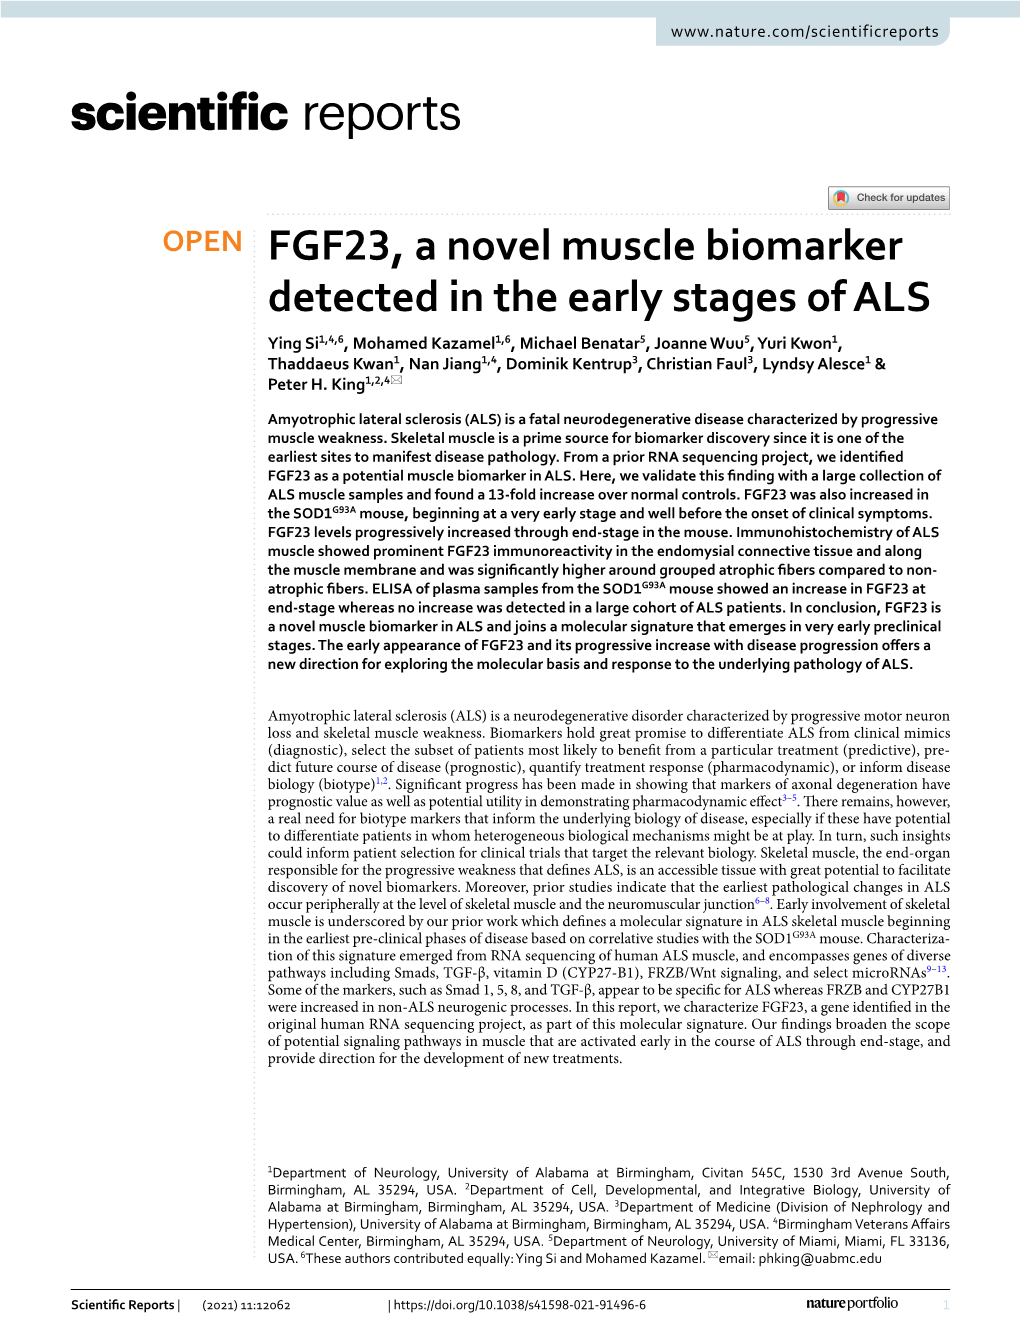 FGF23, a Novel Muscle Biomarker Detected in the Early Stages Of